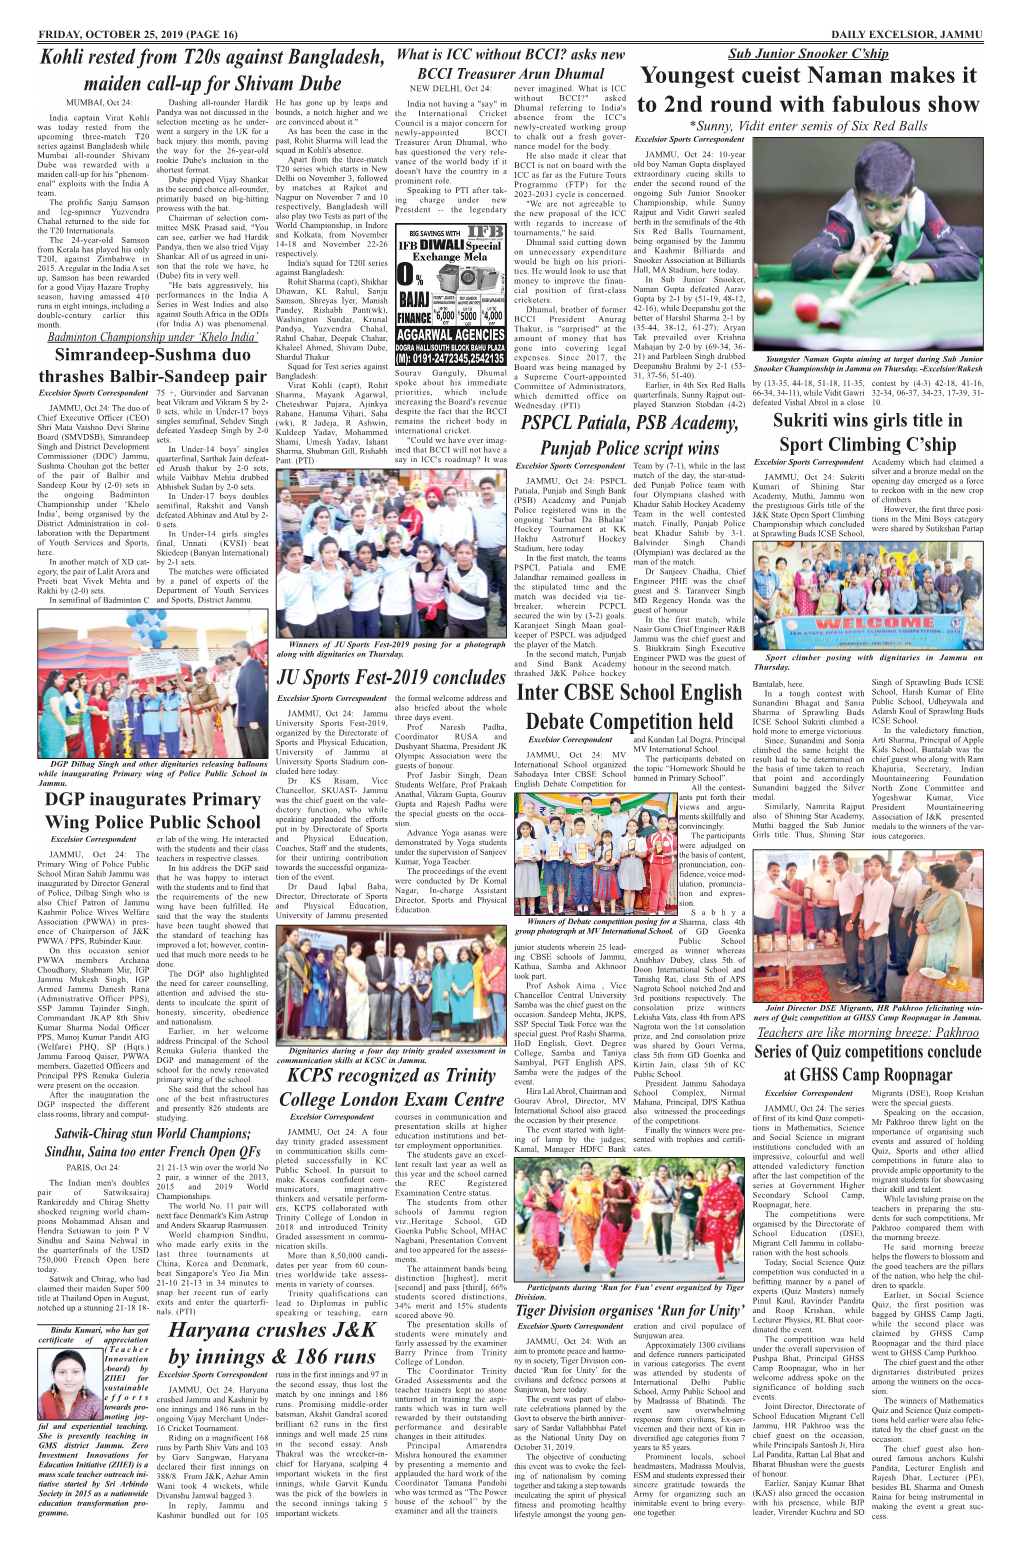 Page16sports.Qxd (Page 1)